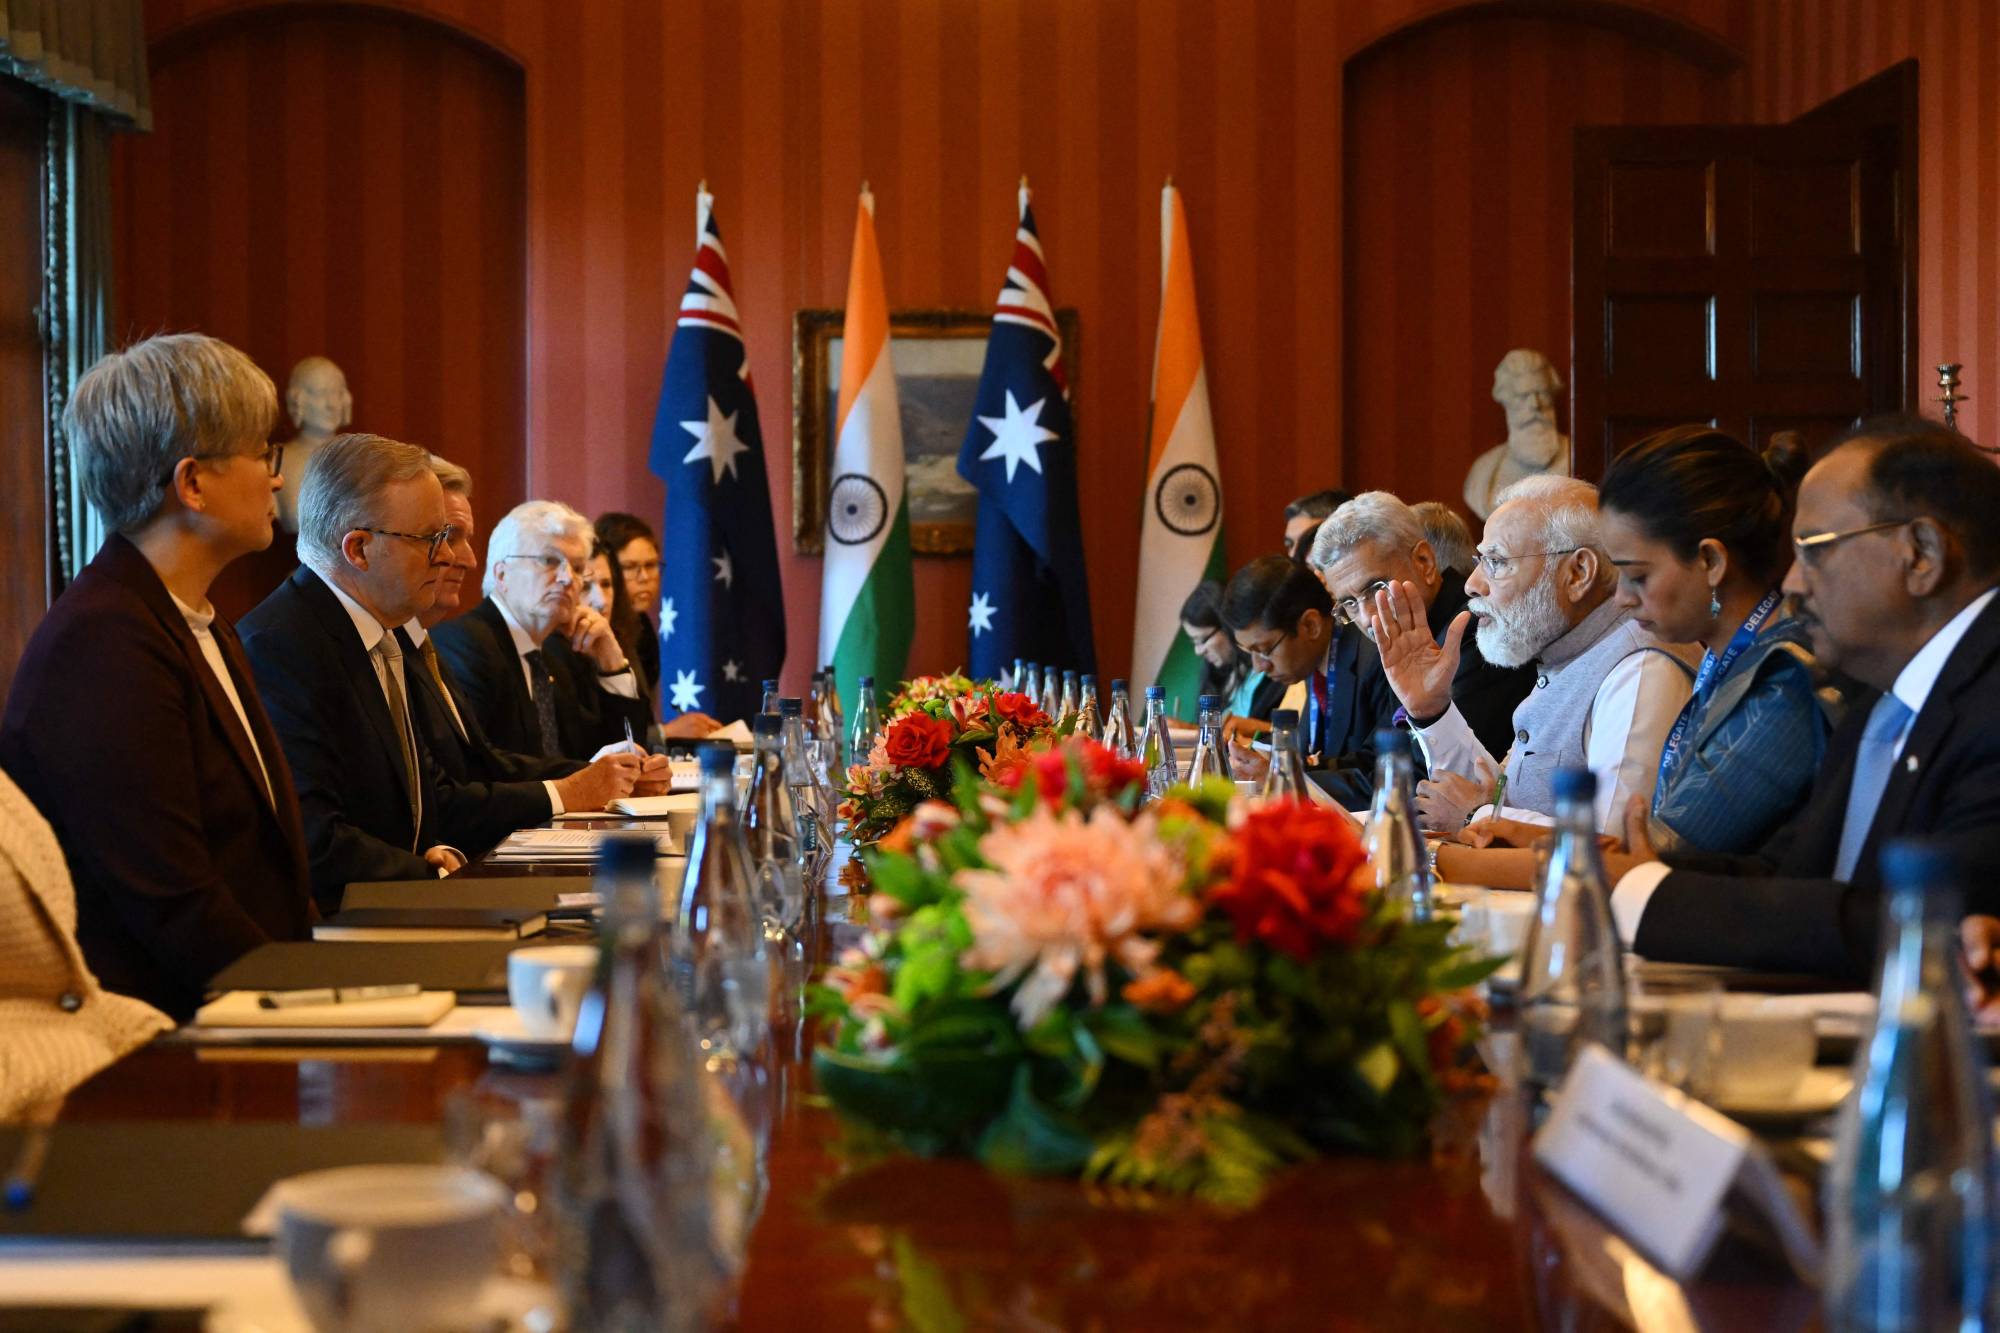 Australian Prime Minister Anthony Albanese (second from left) and India's Prime Minister Narendra Modi (third from right) attend a bilateral meeting at Admiralty House in Sydney on Wednesday. | AFP-JIJI